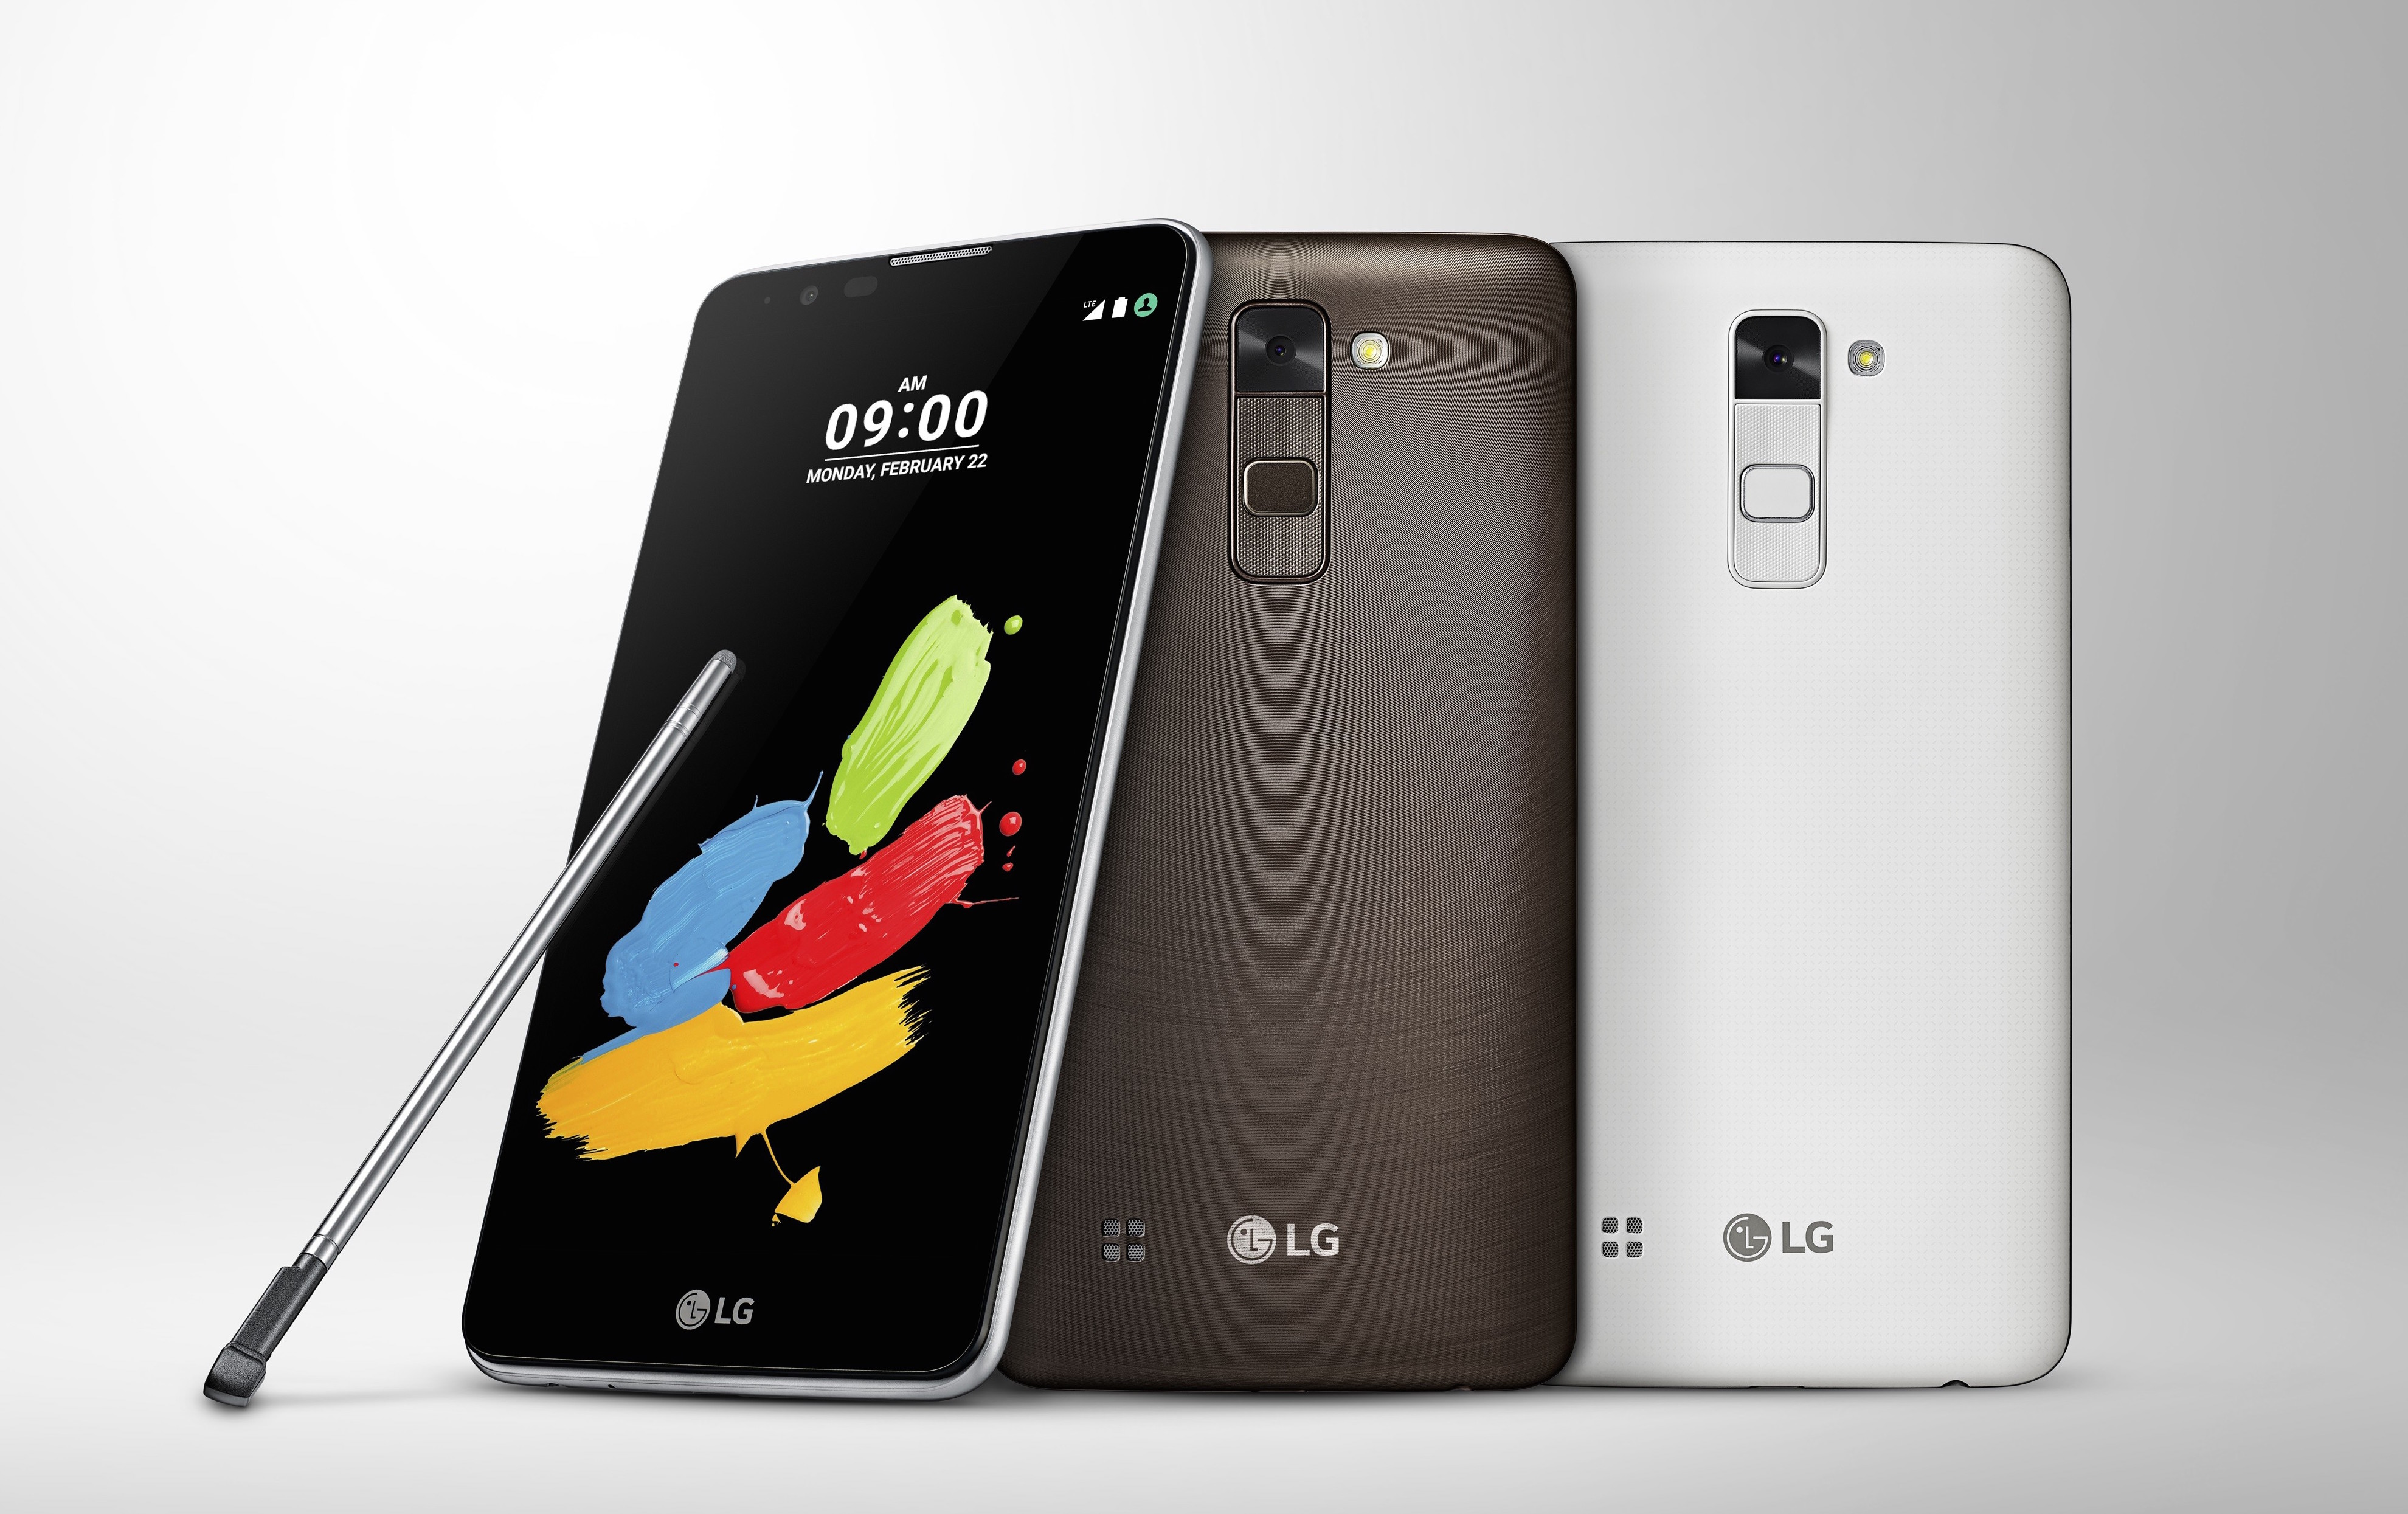 disinfectant Perversion thin LG Outs Its Next Phablet, The Slender LG Stylus 2 | TechCrunch